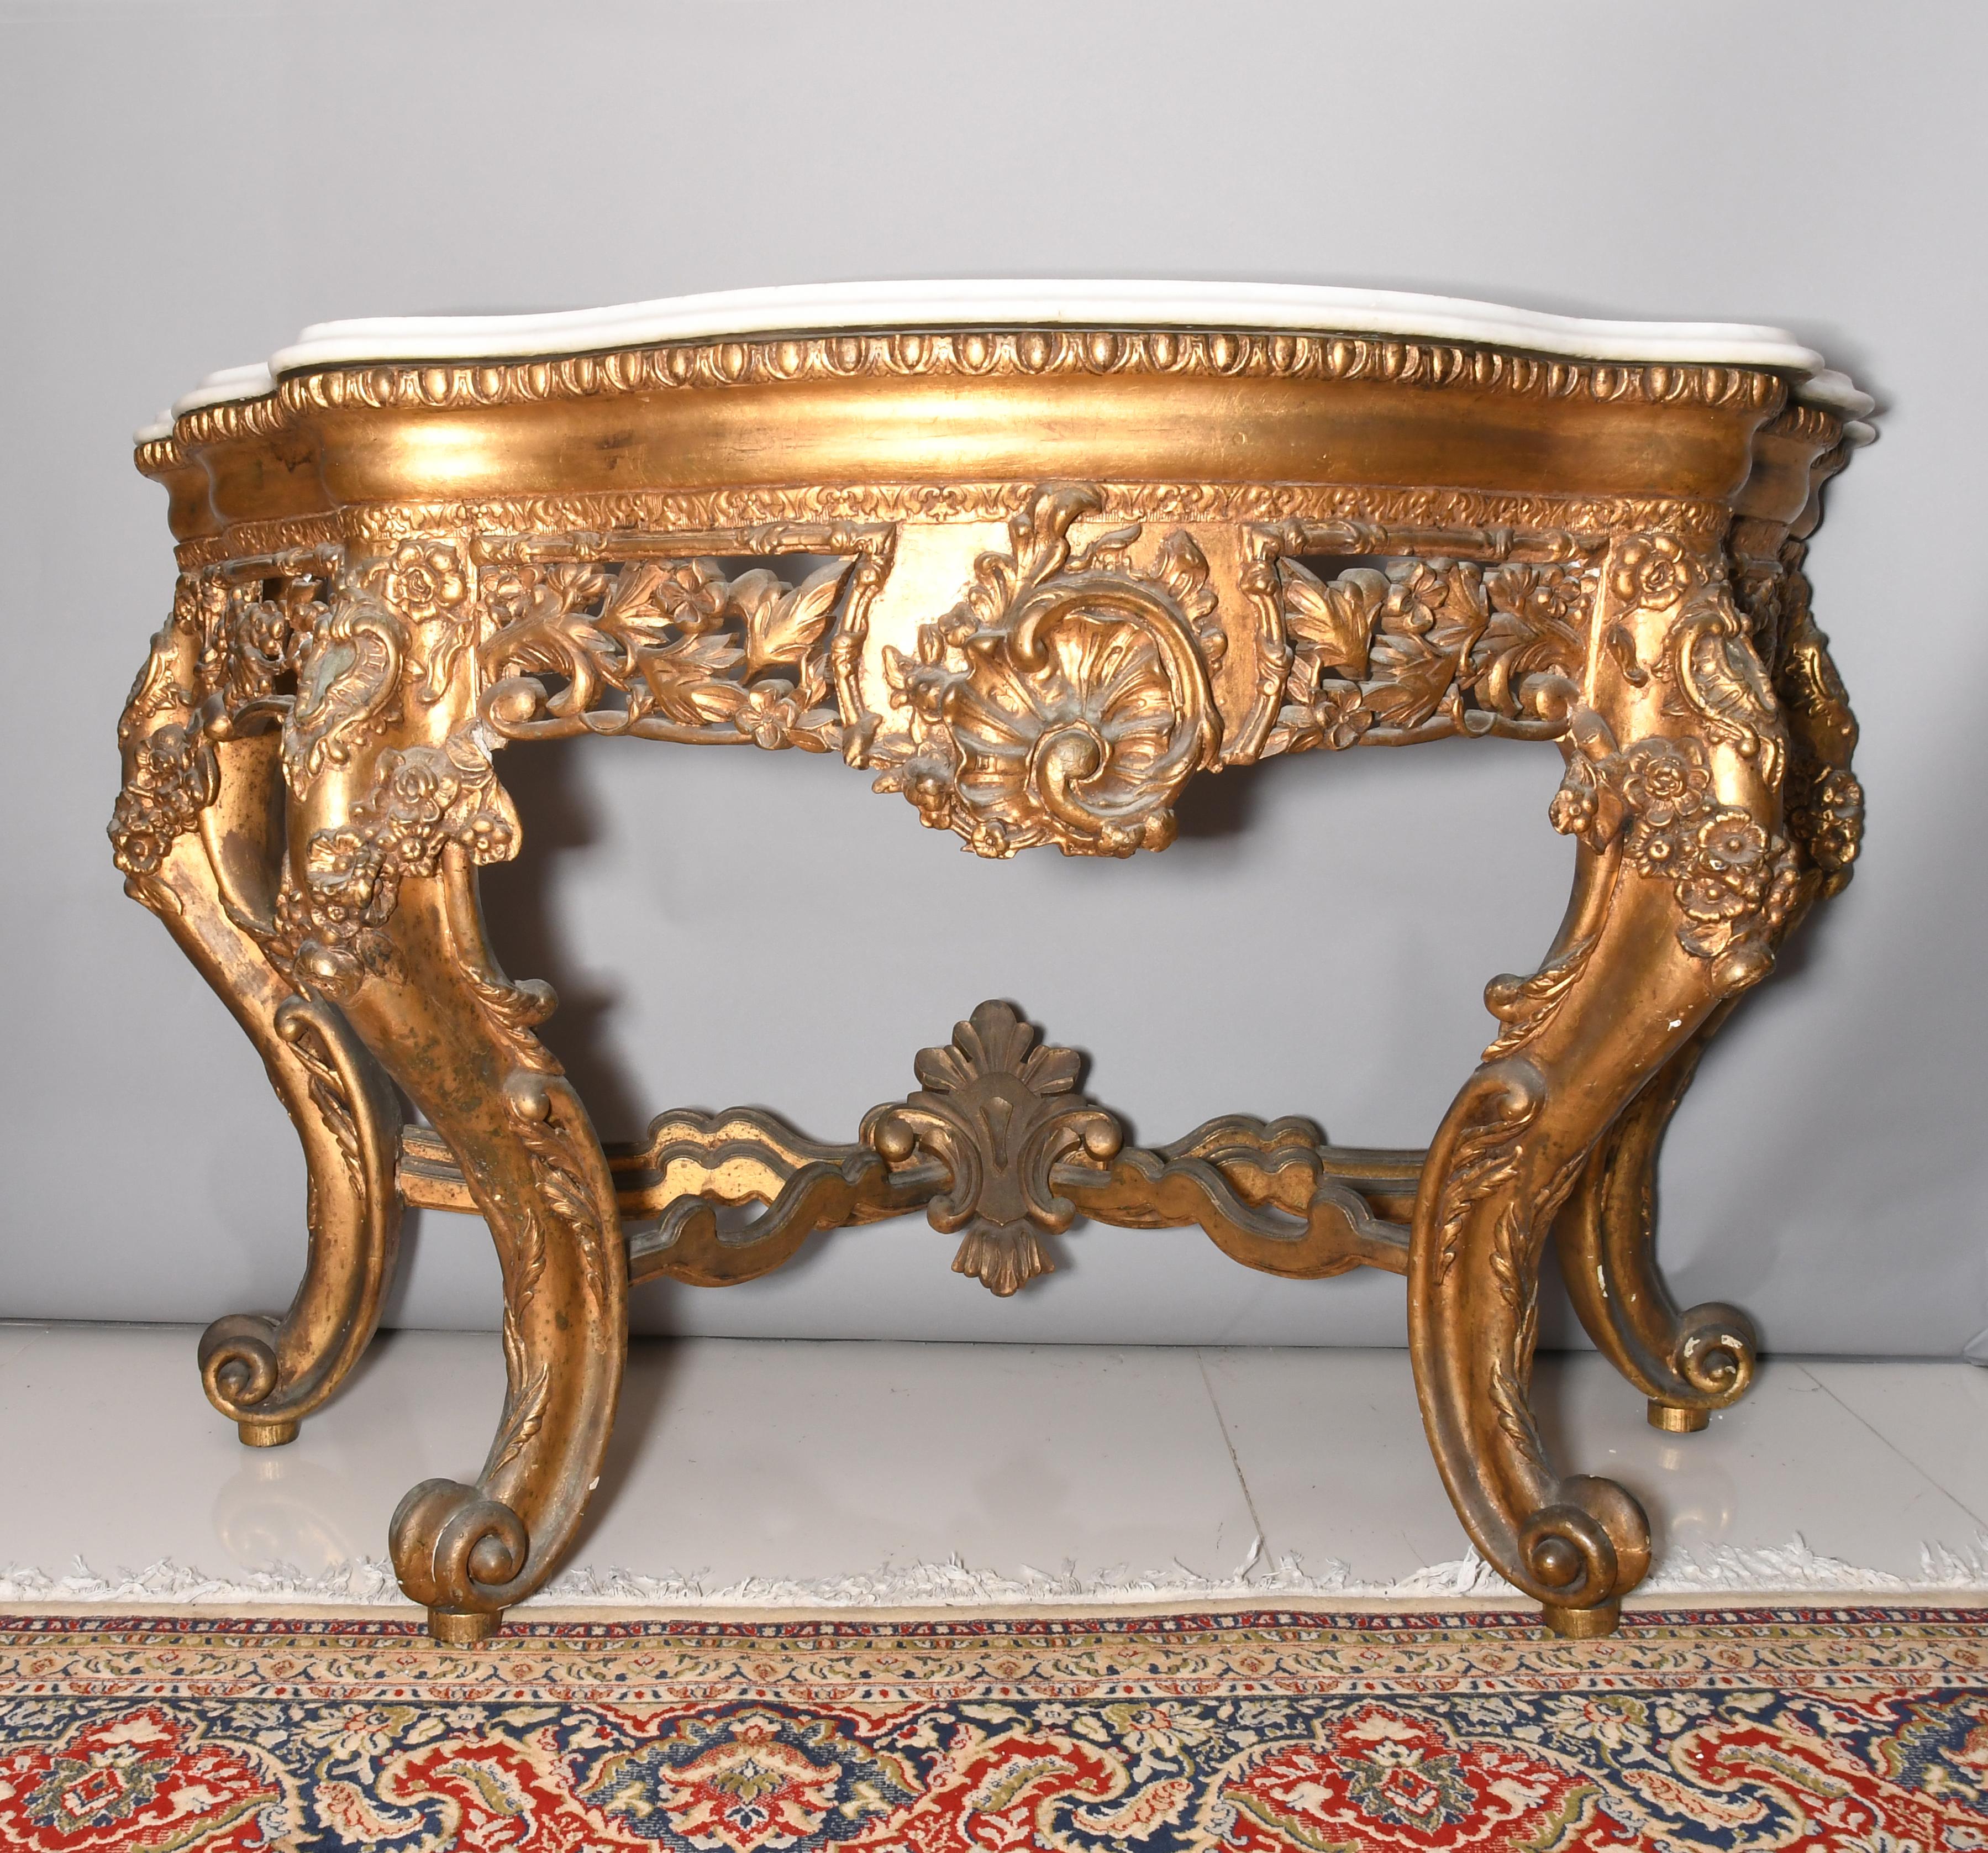 French console has festoon with leaves, flowers, and shells; plus highly scrolled feet and cabriole legs. The stretchers are joined In the center by a shield cartouche. The border of the top of the console is ornated with ribbed wood below a